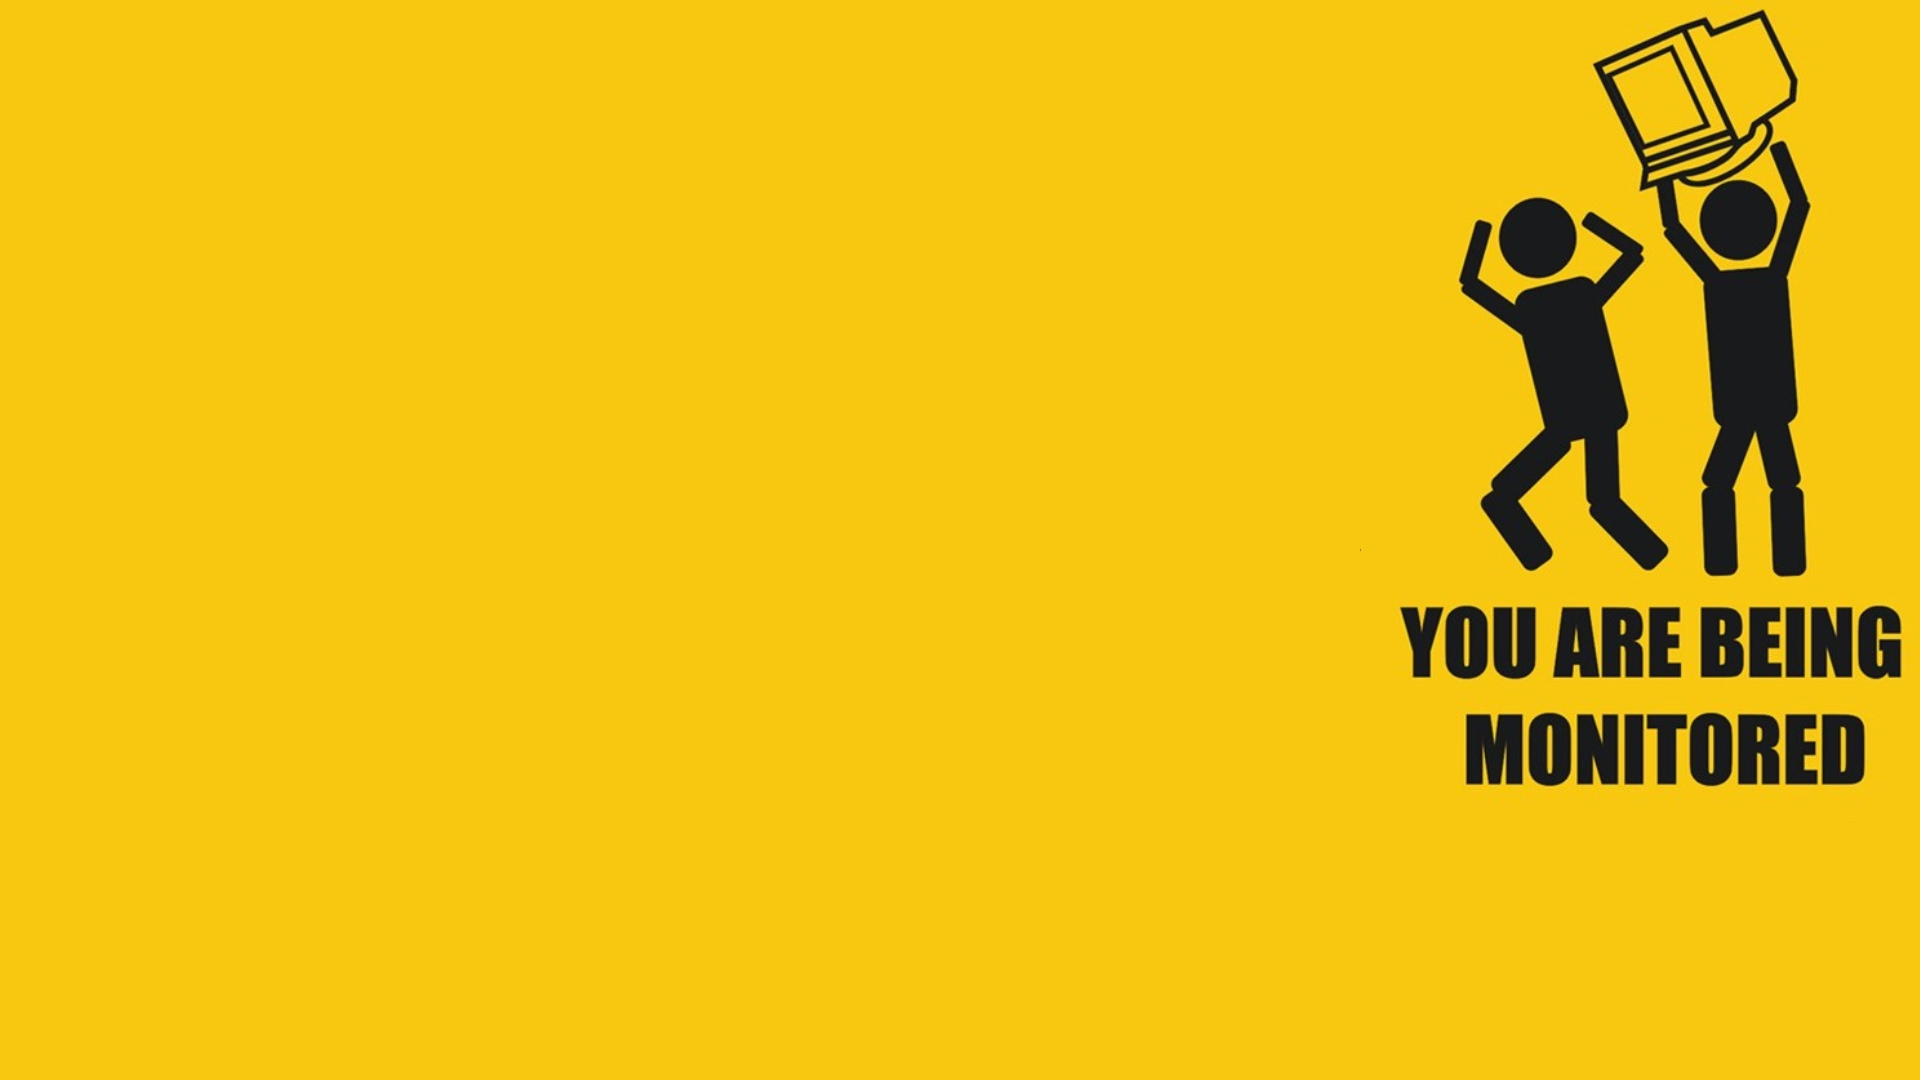 You are being monitored - Yellow background with slogan